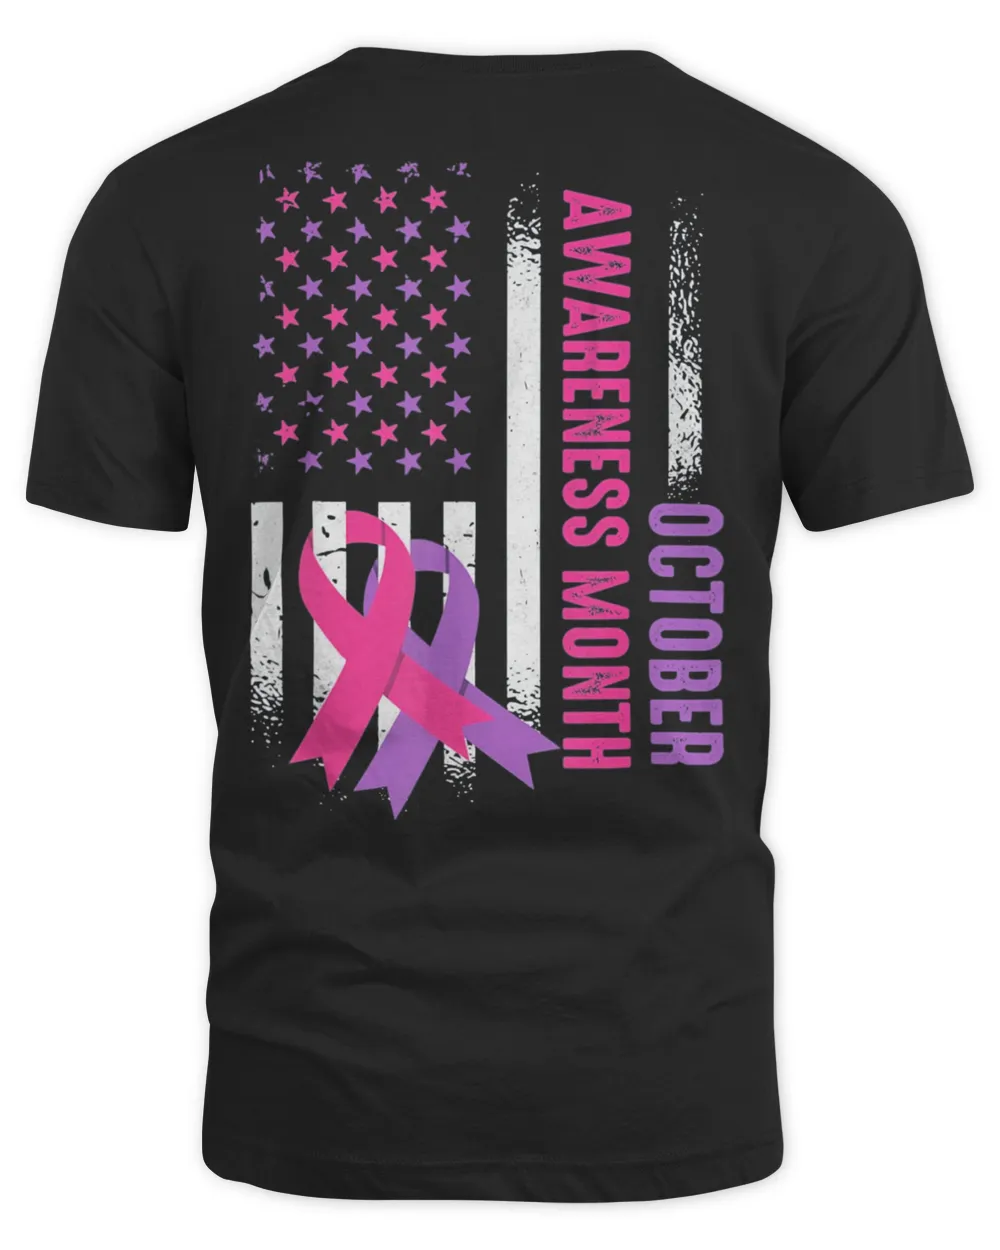 October Breast Cancer & Domestic Violence Awareness Month T-Shirt